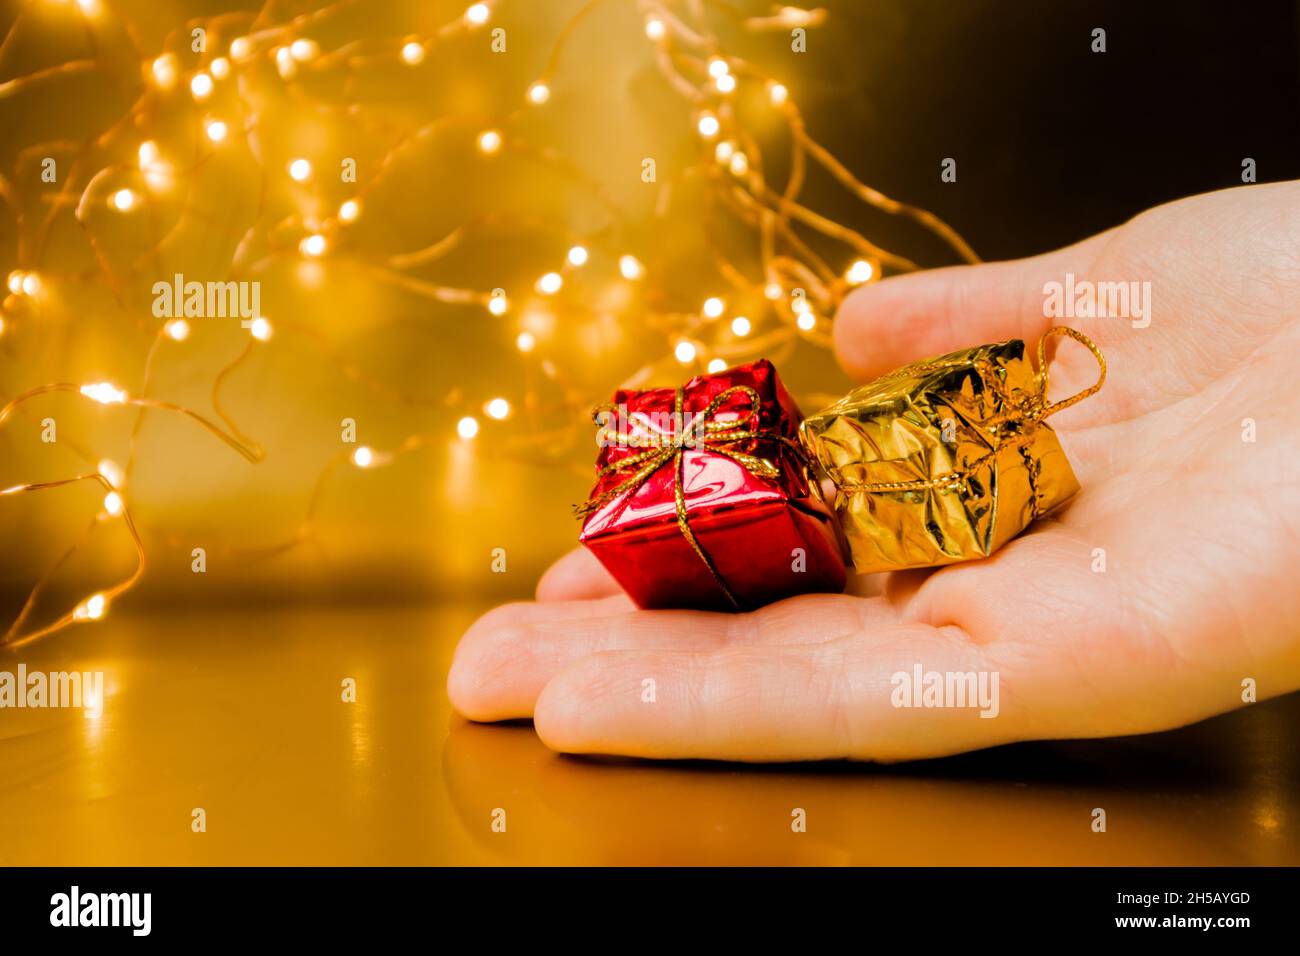 New Year's gift in hand. Presenting a New Year's gift. Small souvenirs. Stock Photo